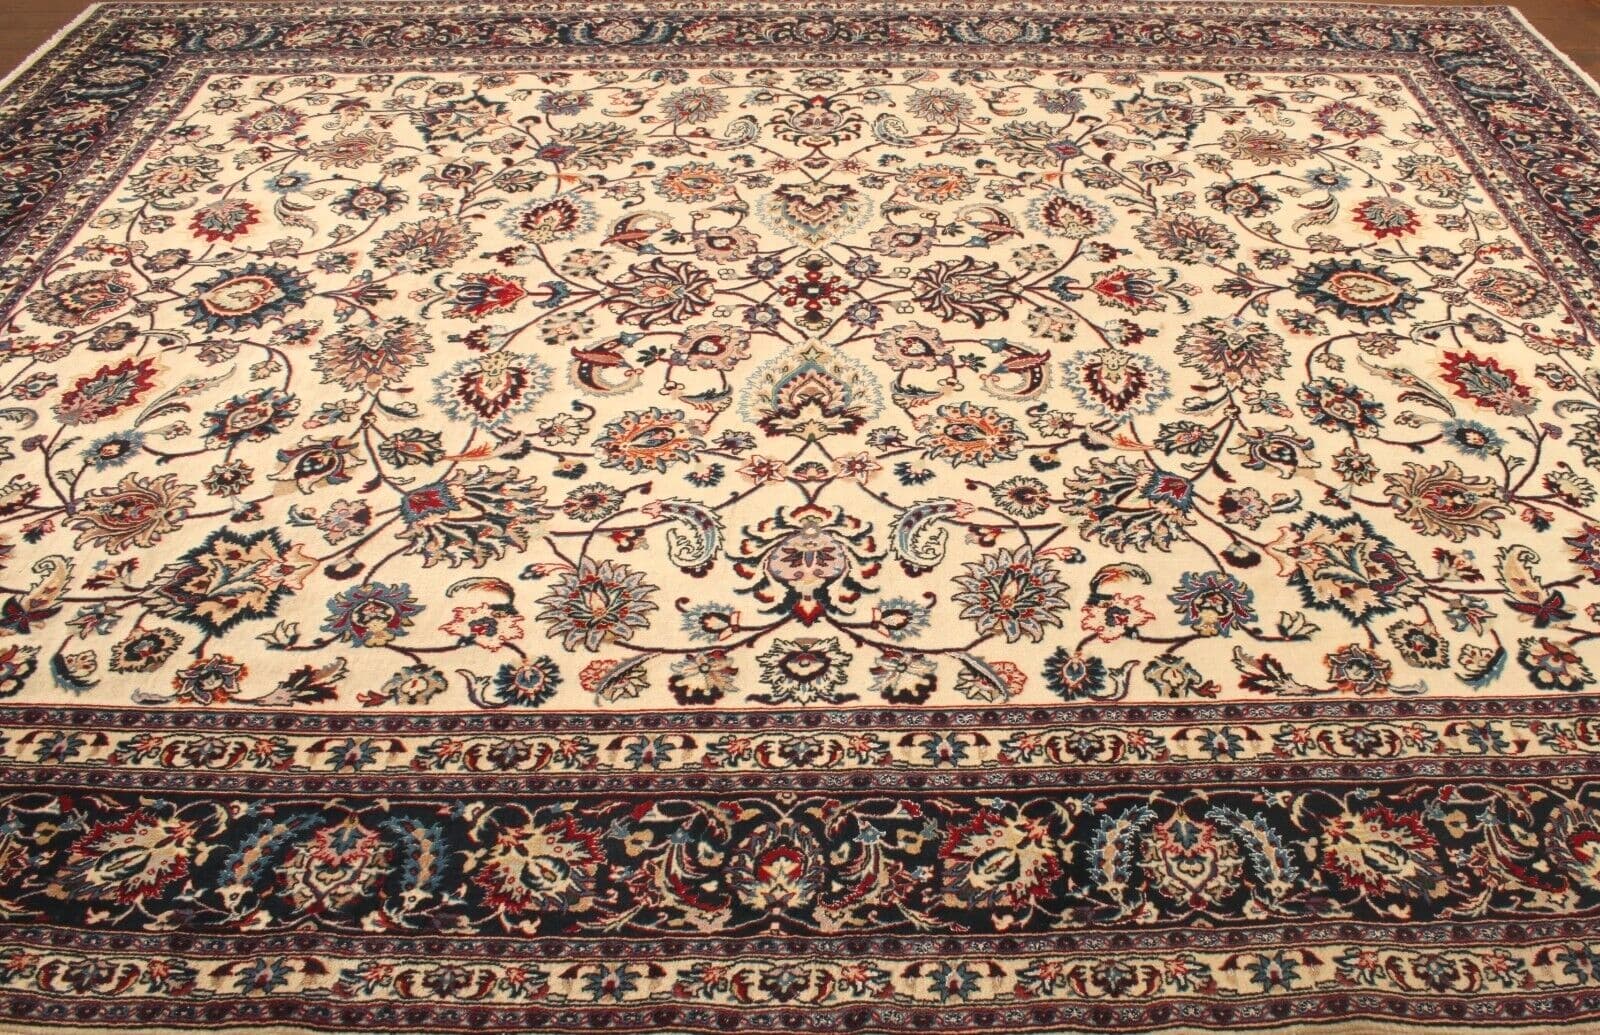 Artistic display of the Handmade Contemporary Persian Style Tabriz Rug as a room centerpiece